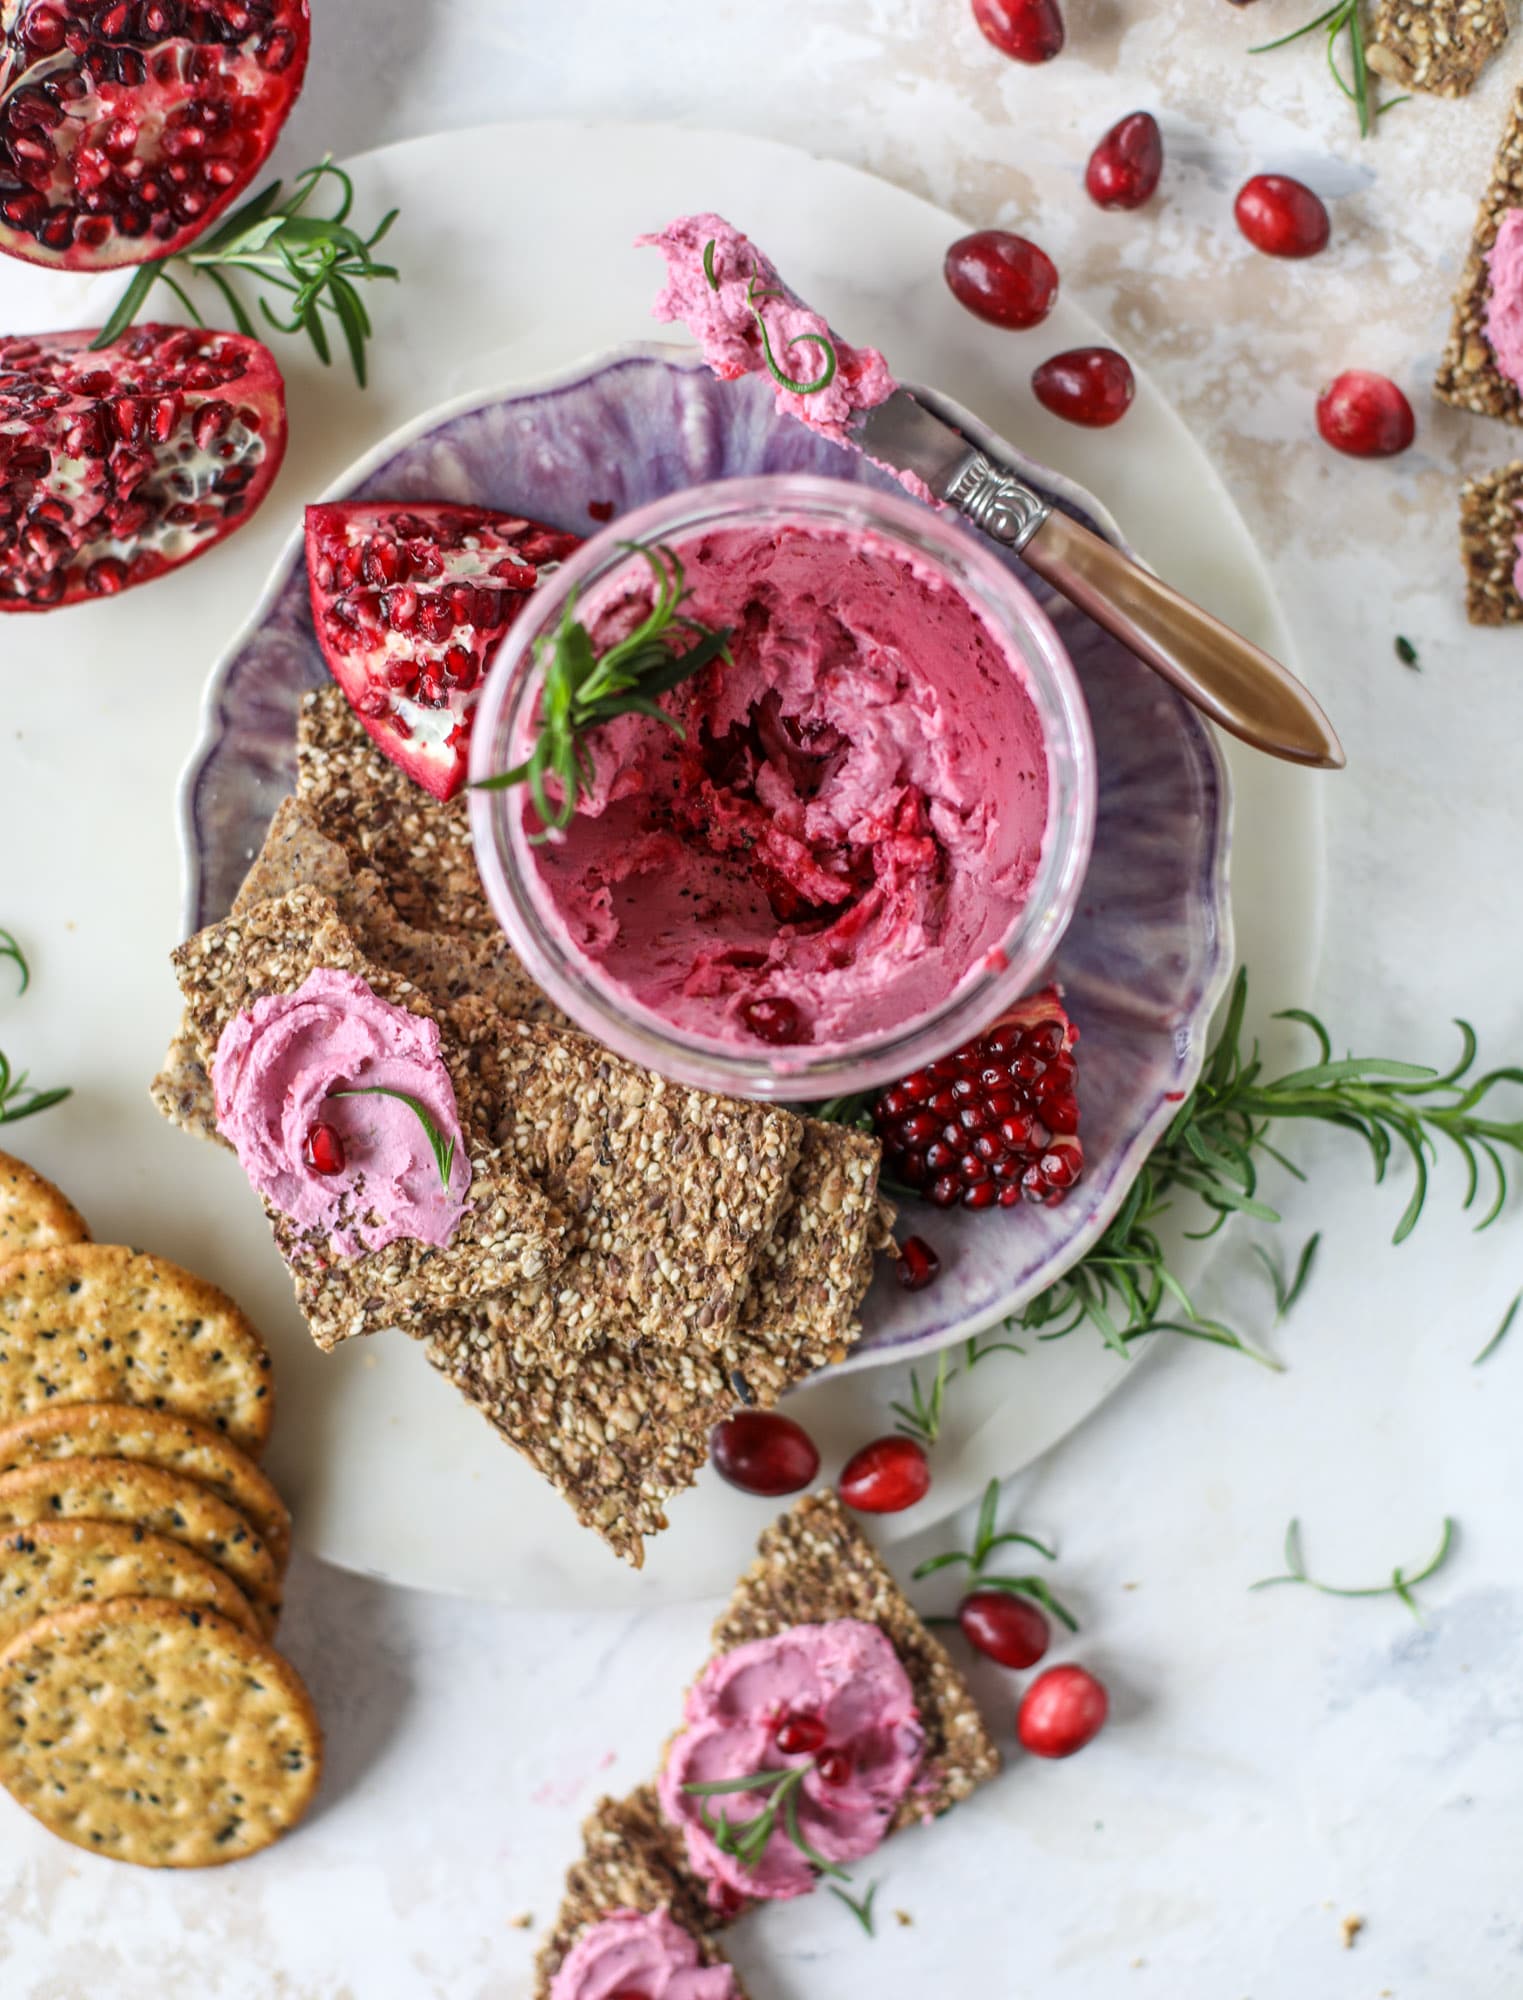 This whipped cranberry goat cheese spread is the perfect holiday appetizer! You can make it ahead of time and serve it with a cheese board or bread and crackers - before or during the meal! Plus it's super pretty too! I howsweeteats.com #cranberry #goatcheese